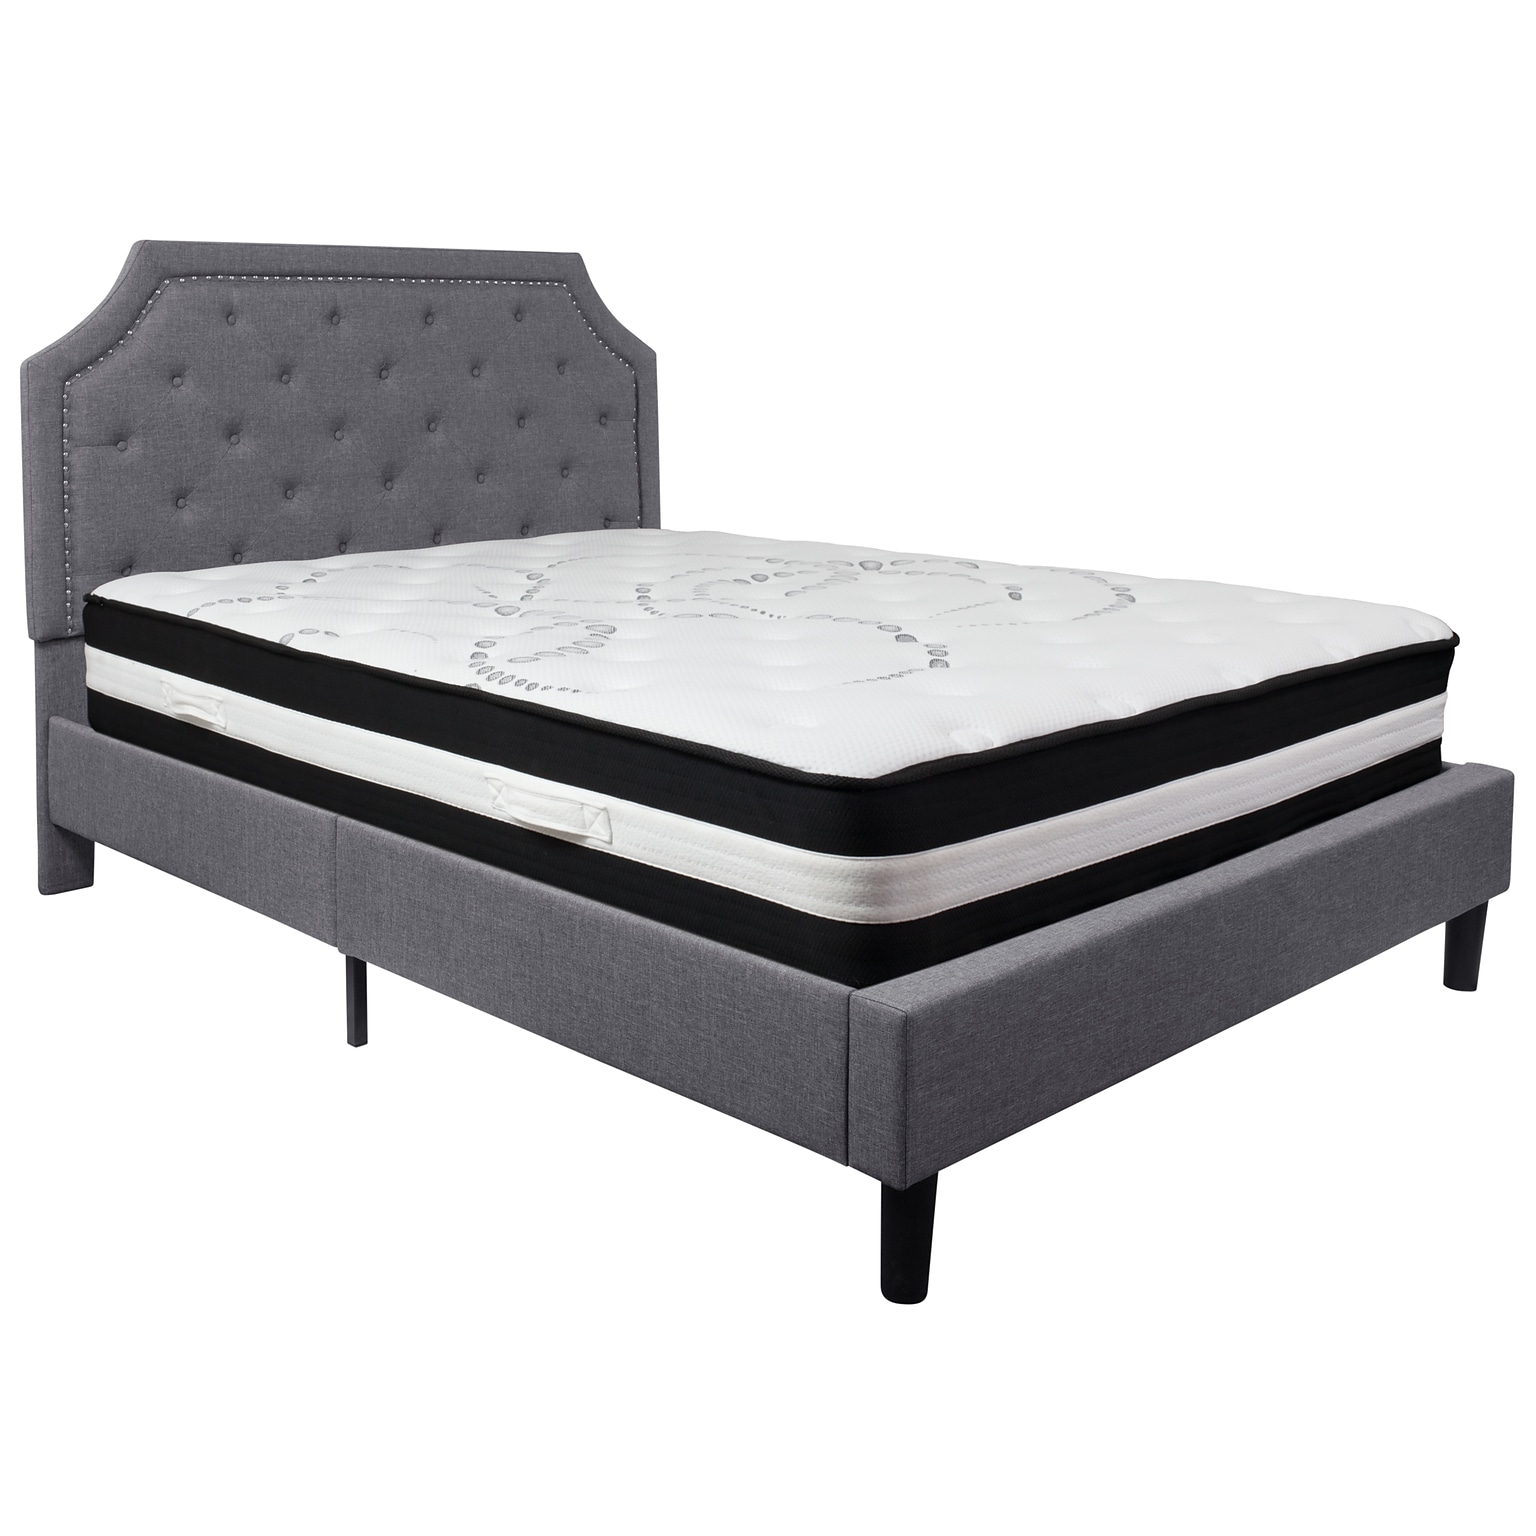 Flash Furniture Brighton Tufted Upholstered Platform Bed in Light Gray Fabric with Pocket Spring Mattress, Queen (SLBM11)